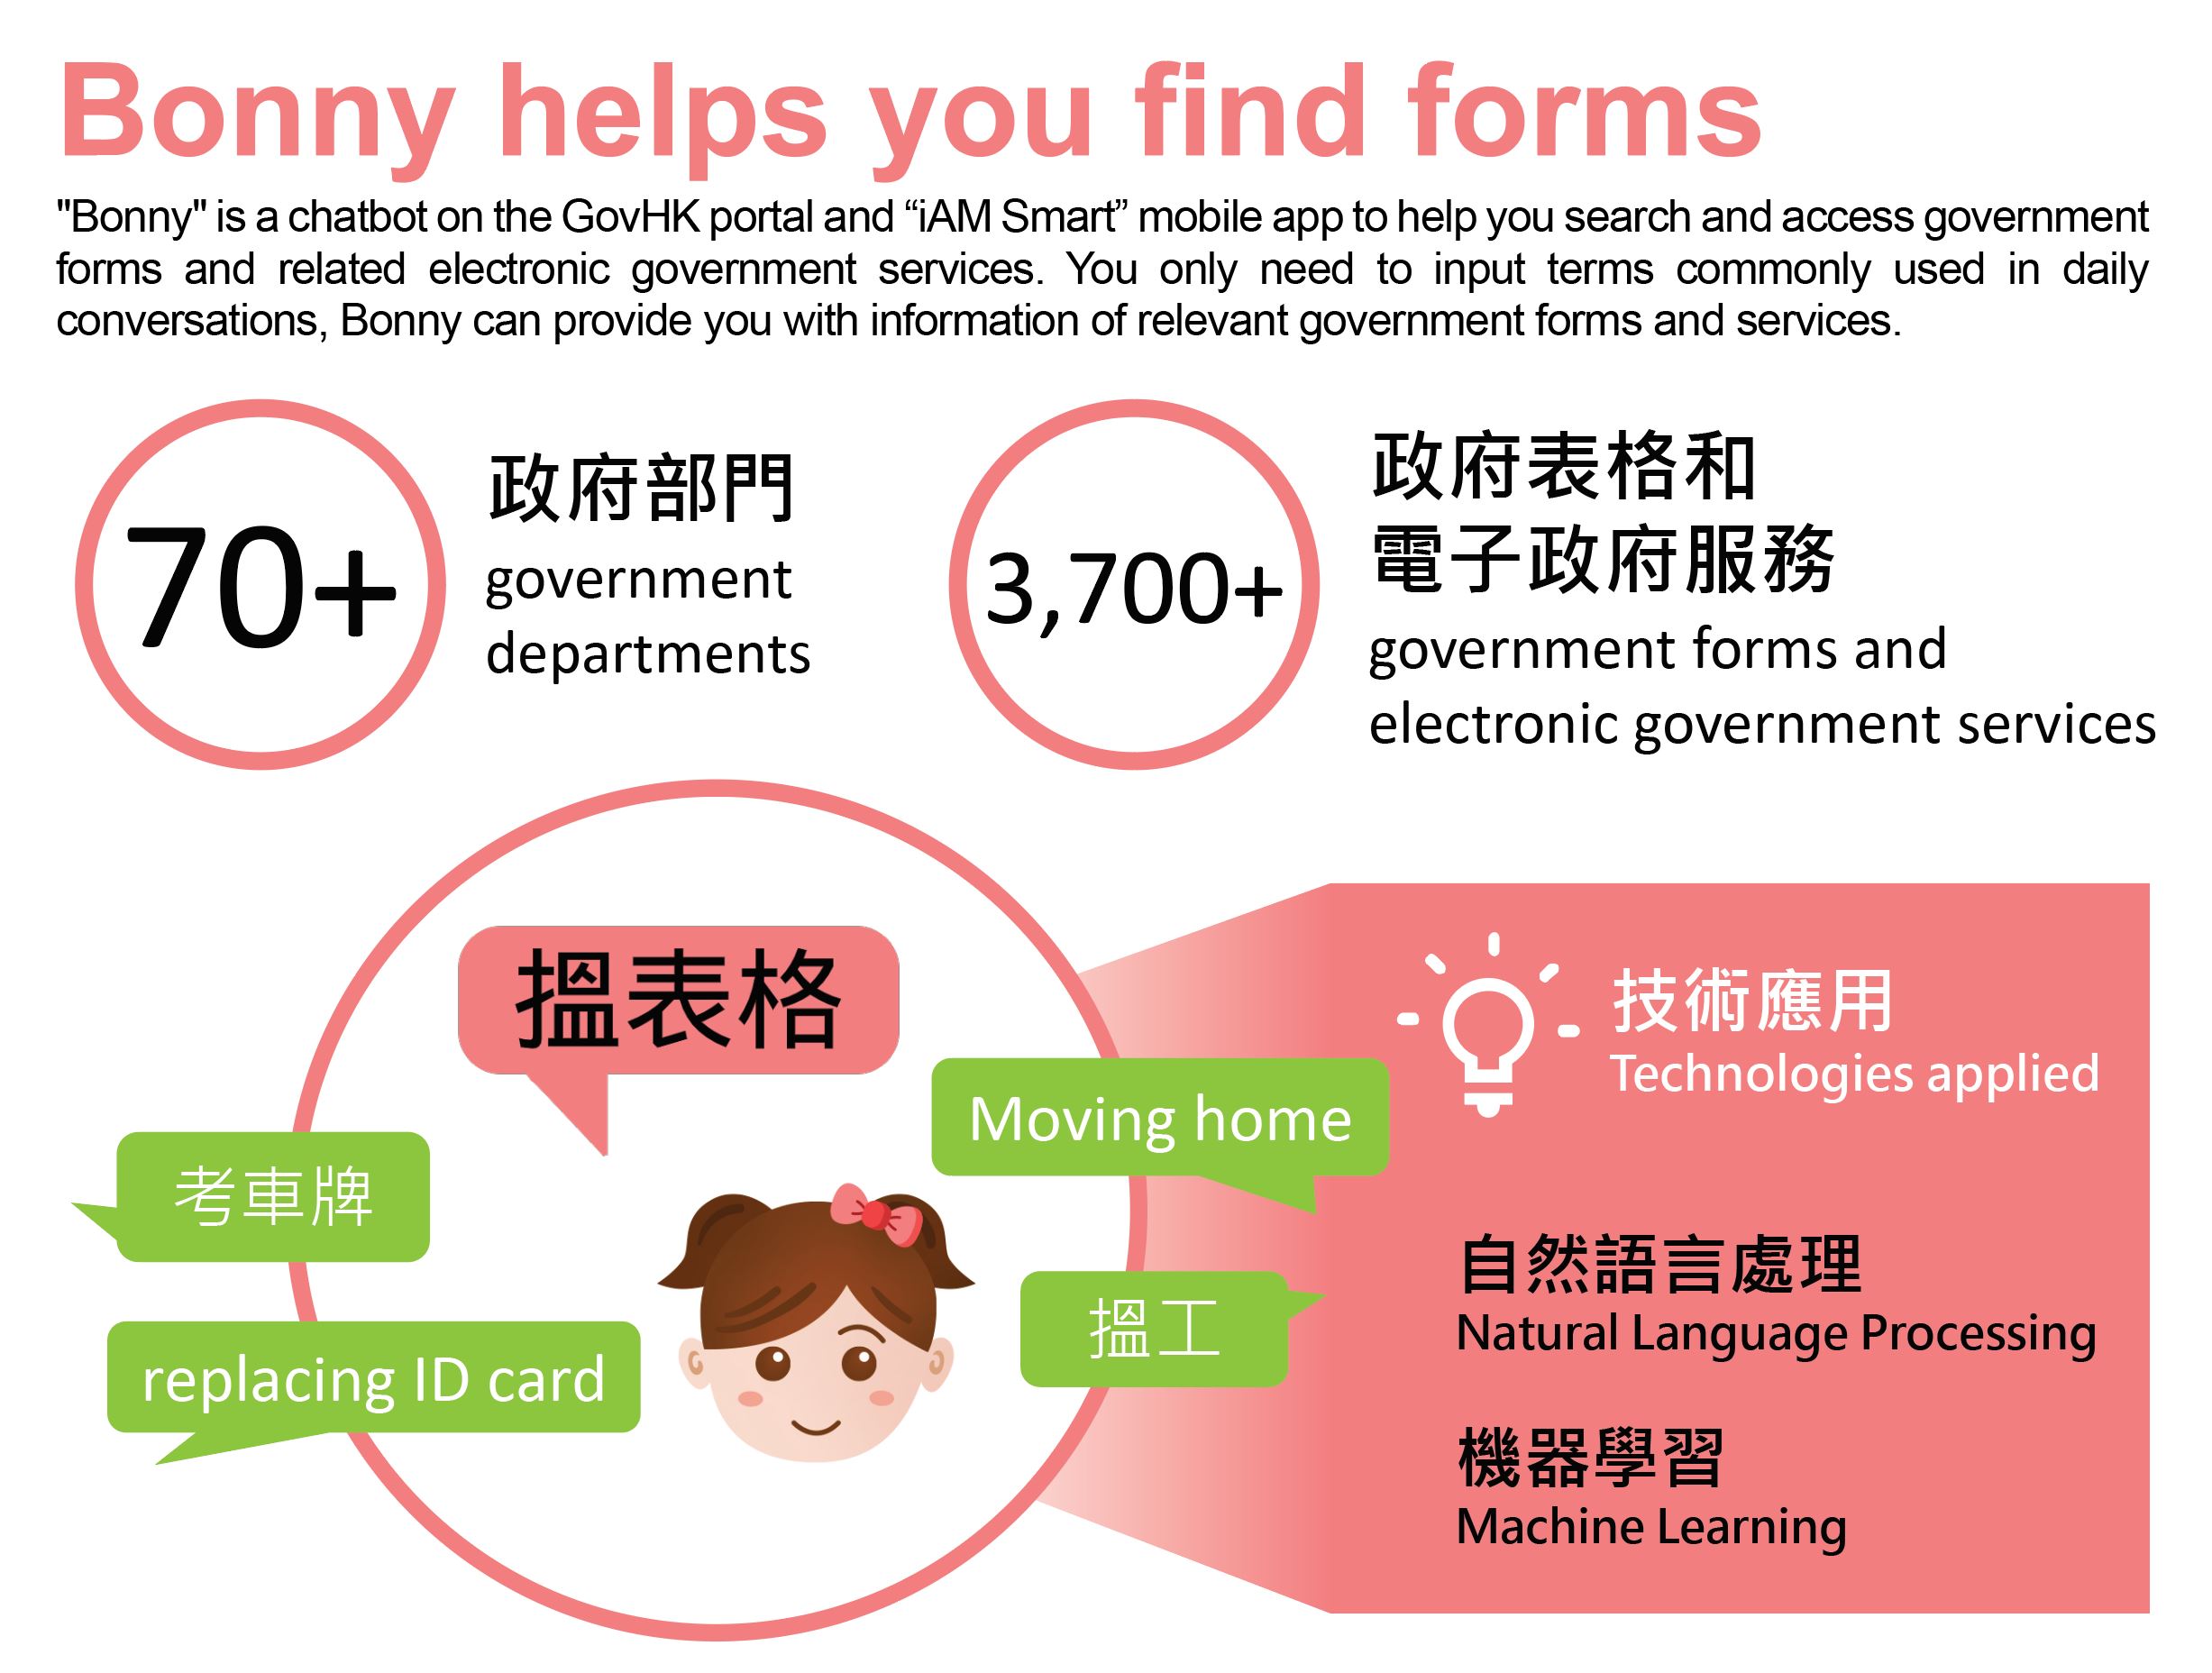 Bonny helps you find forms,
				Bonny` is a chatbot on the GovHK portal and “iAM Smart” mobile app to help you search and access government forms and related electronic government services. You only need to input terms commonly used in daily conversations, Bonny can provide you with information of relevant government forms and services.